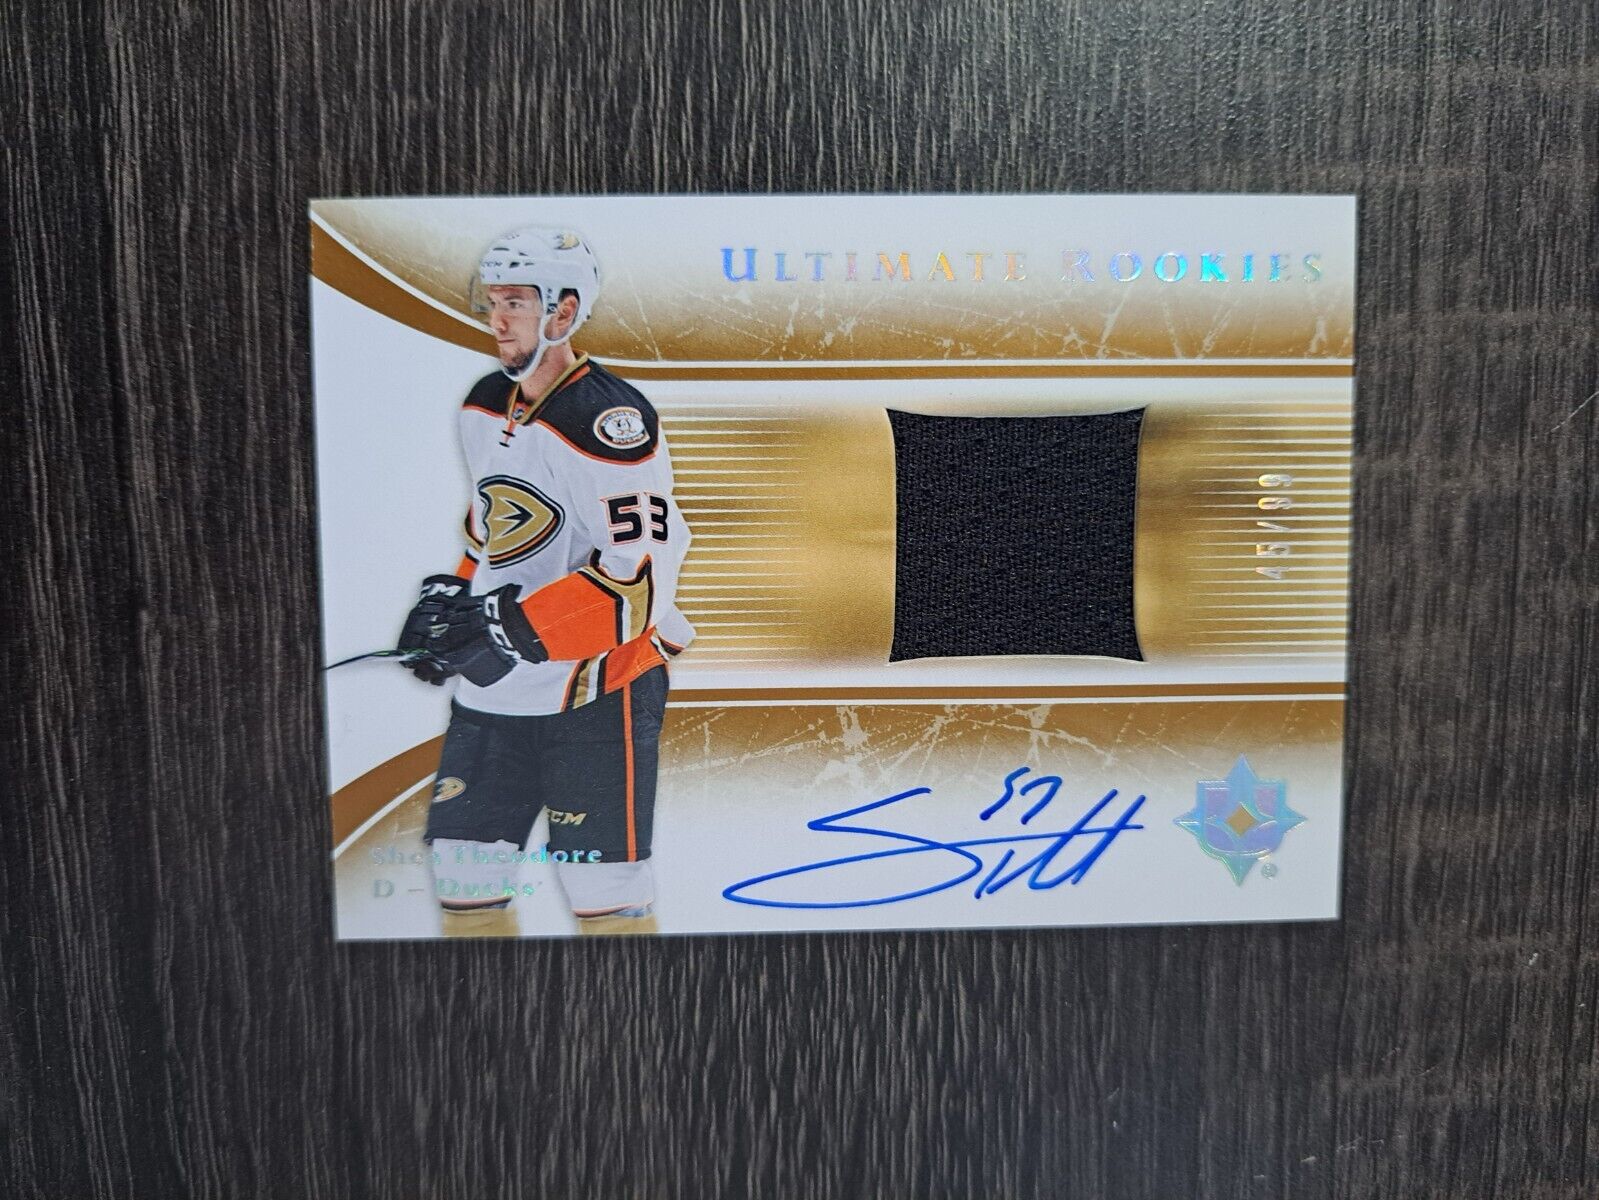 2015-16 Ultimate Collection Rookie Spectrum Silver Shea Theodore jersey auto /99